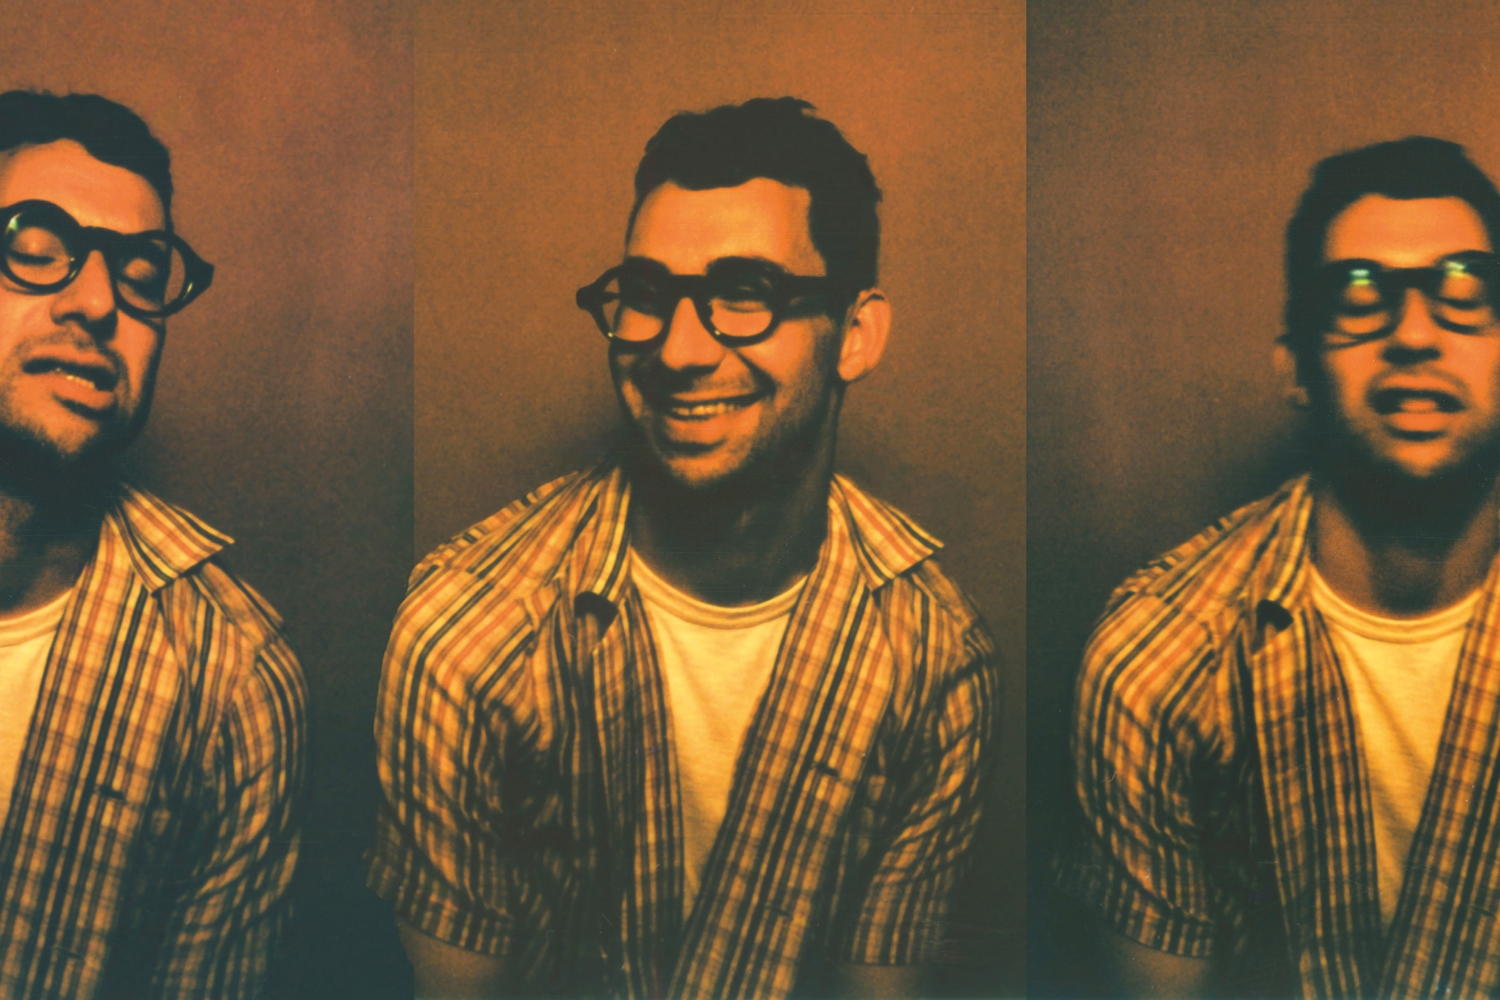 Bleachers’ Jack Antonoff is on the cover of DIY’s August 2021 issue